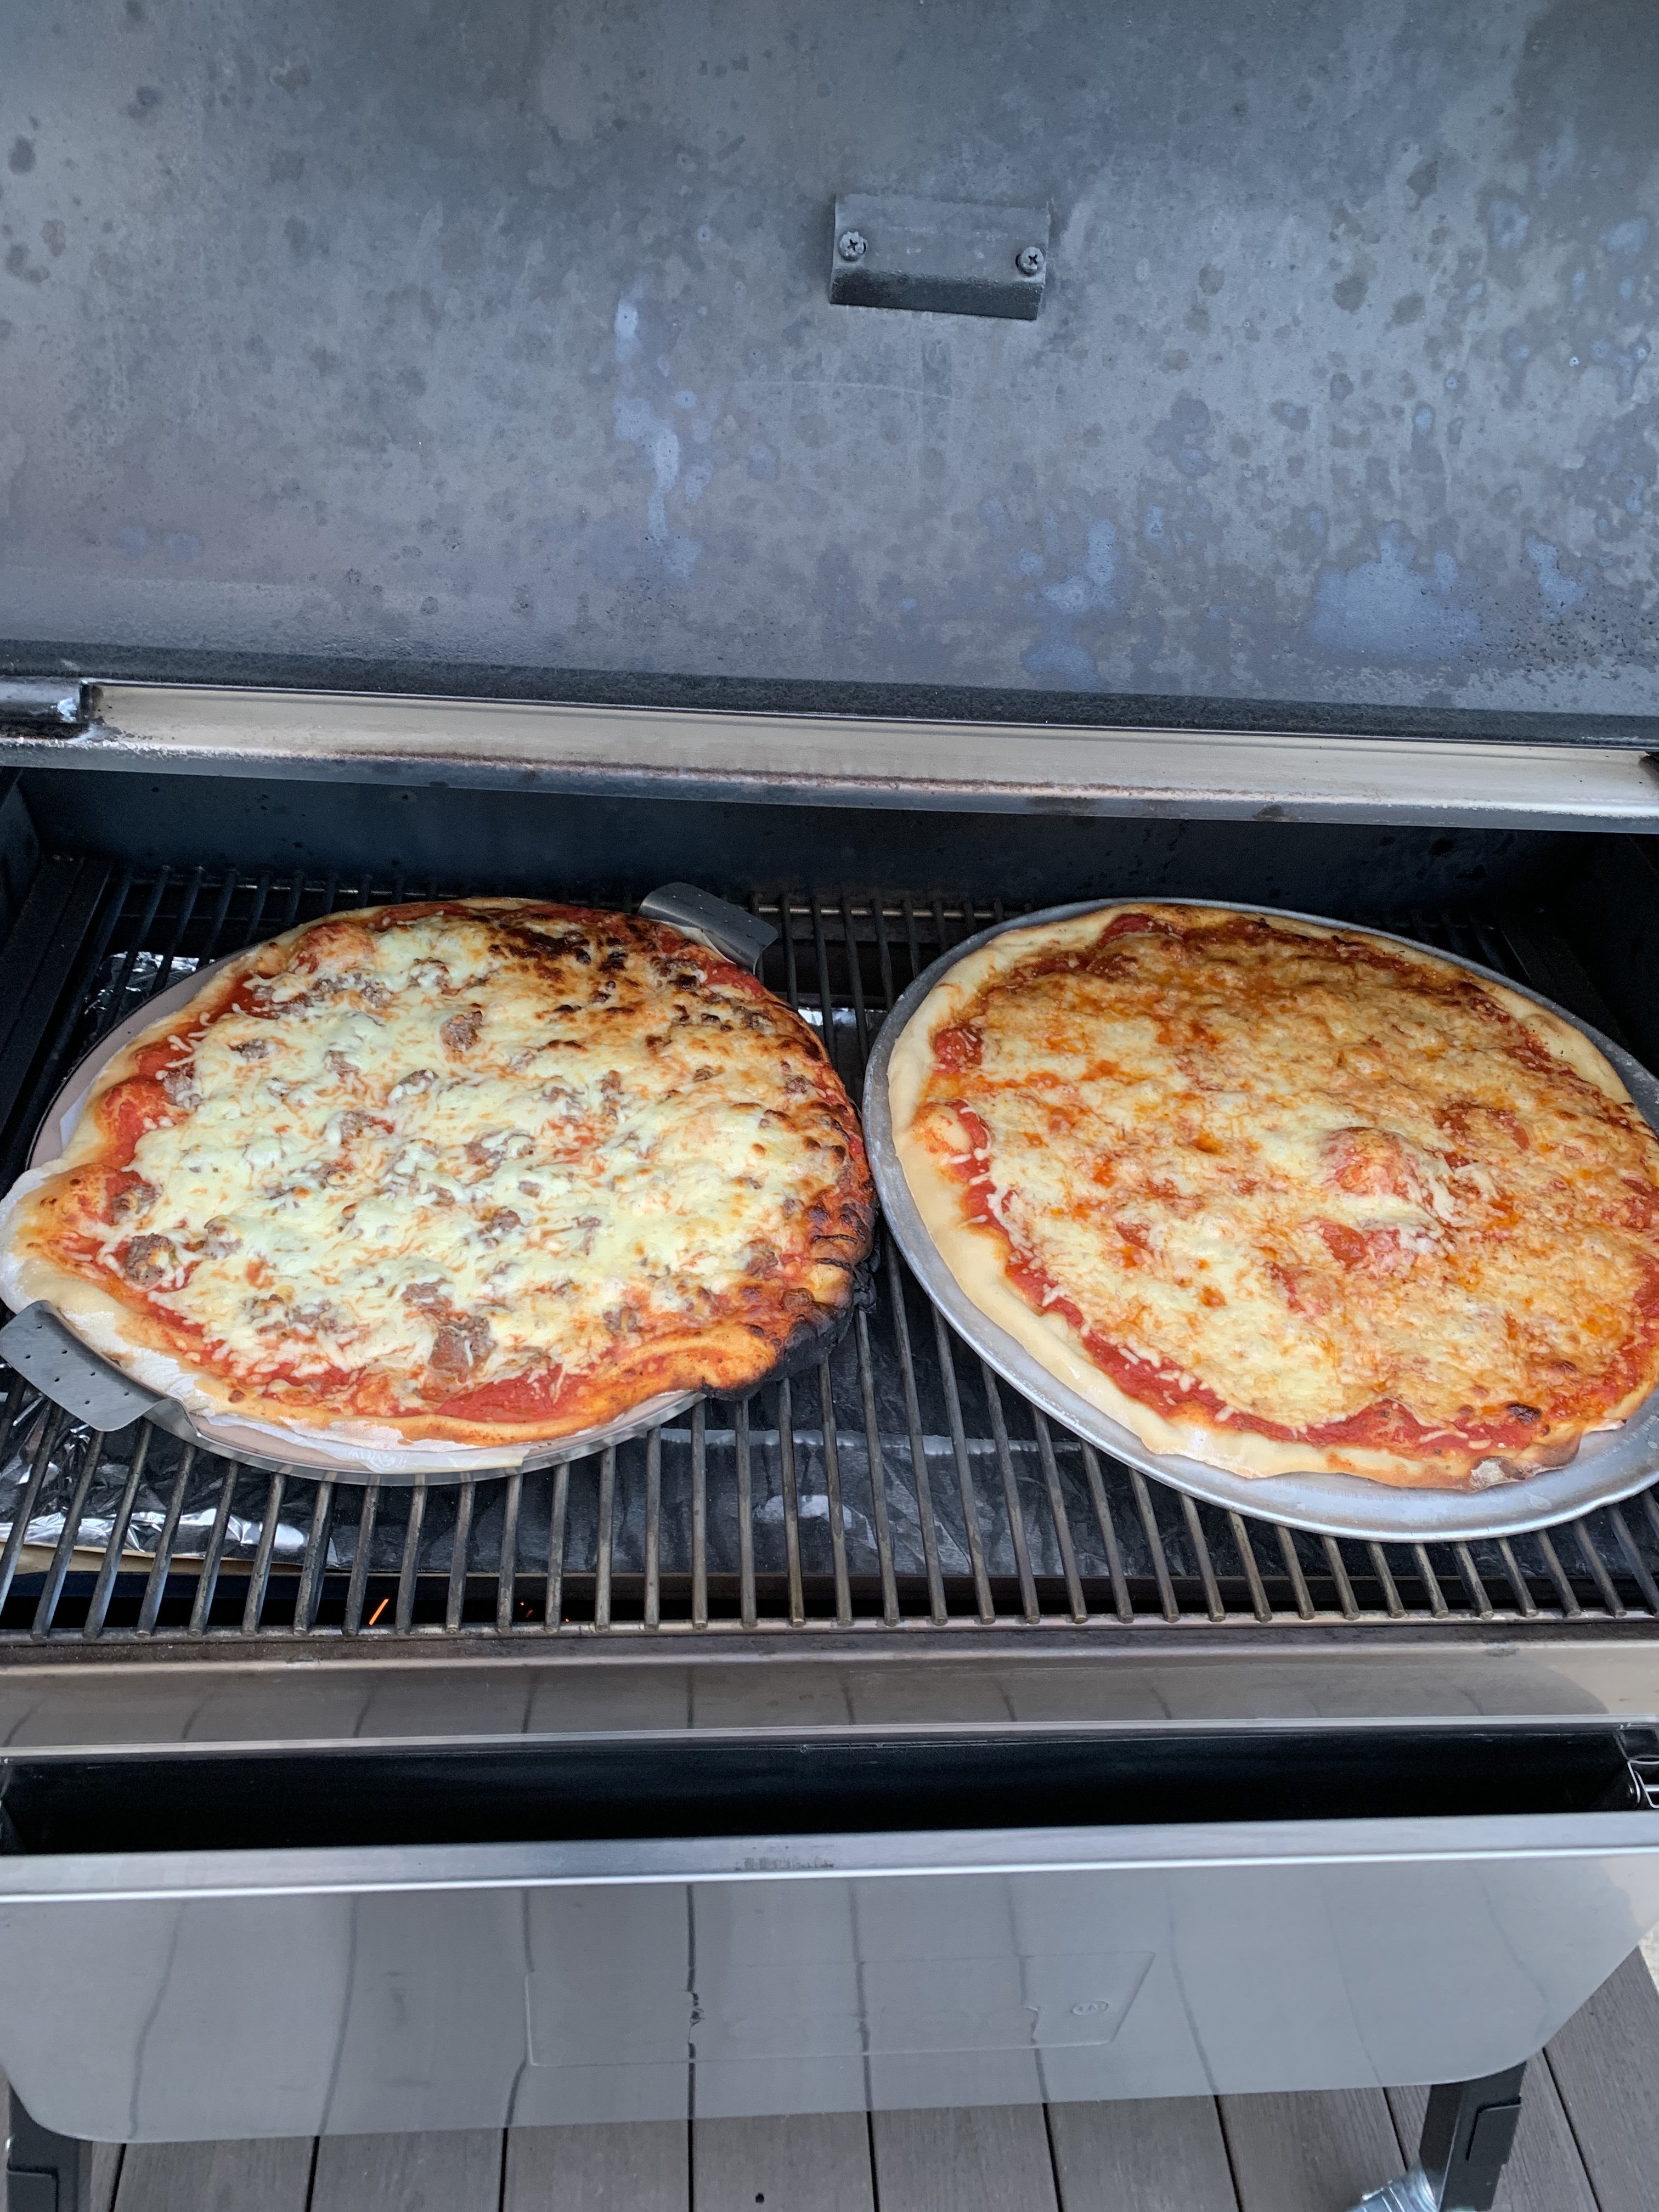 Cooked a pizza on the Pro 575 today. 500 degrees. Used a cast iron